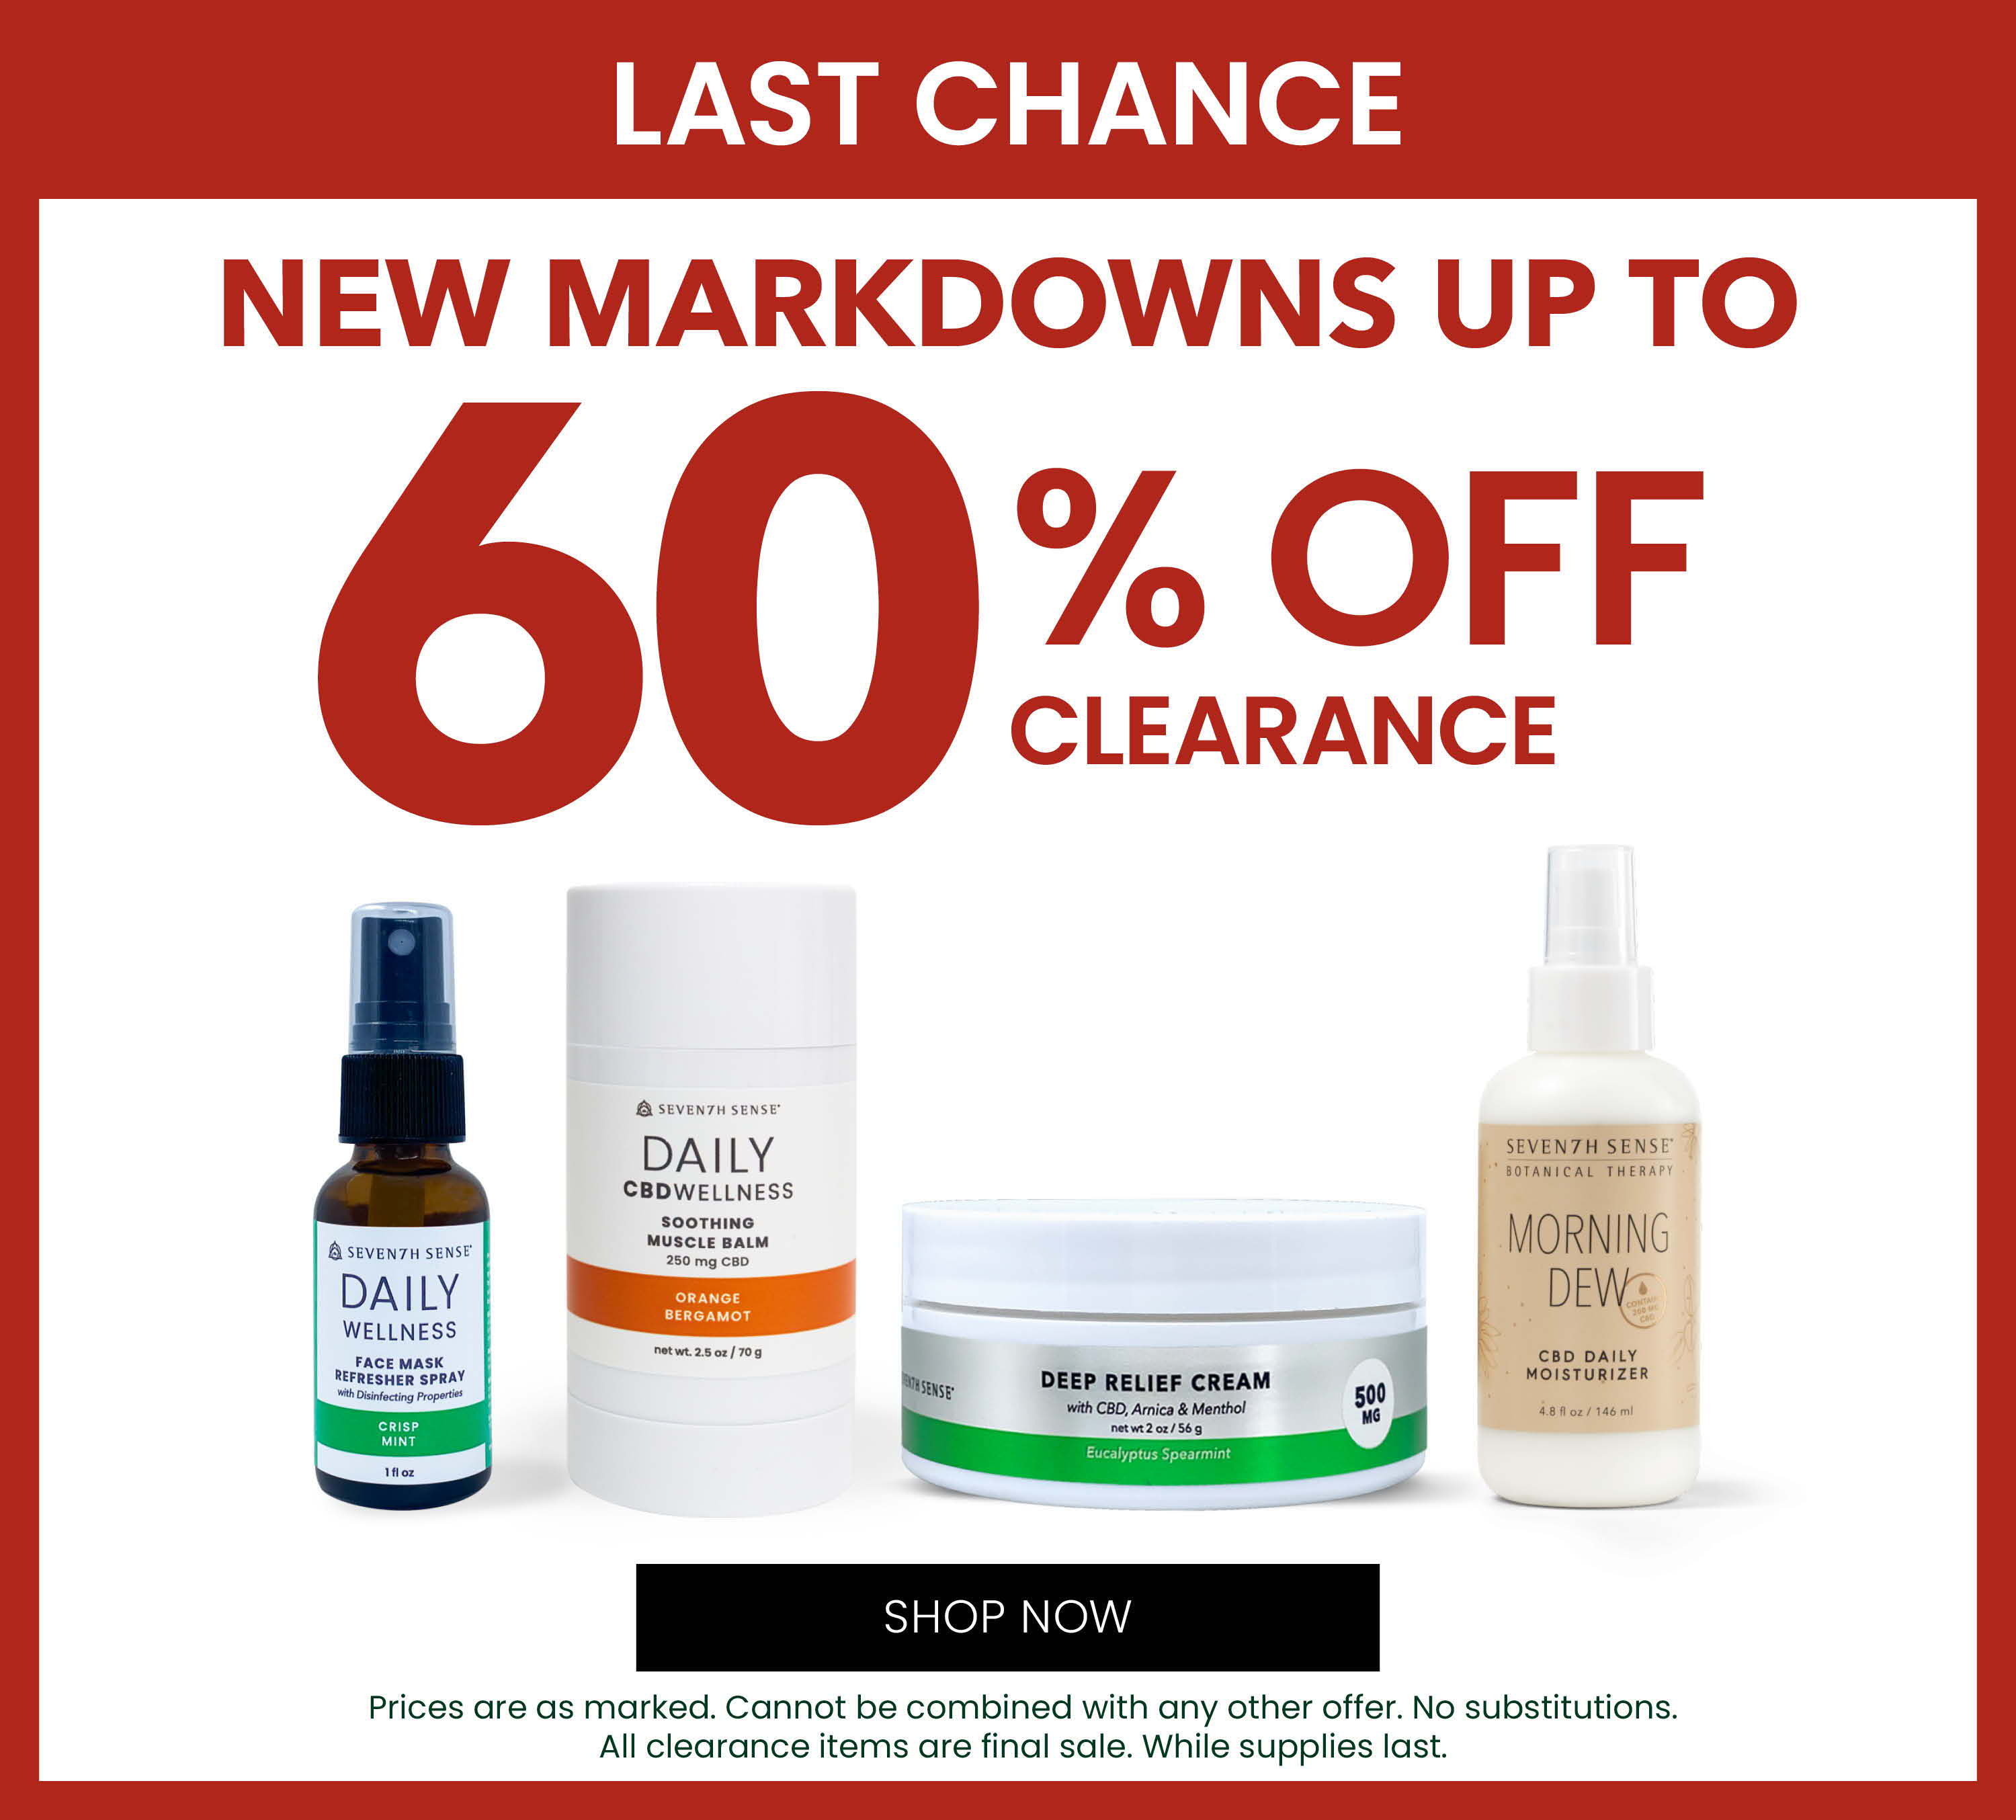 New markdowns up to 60% off clearance.